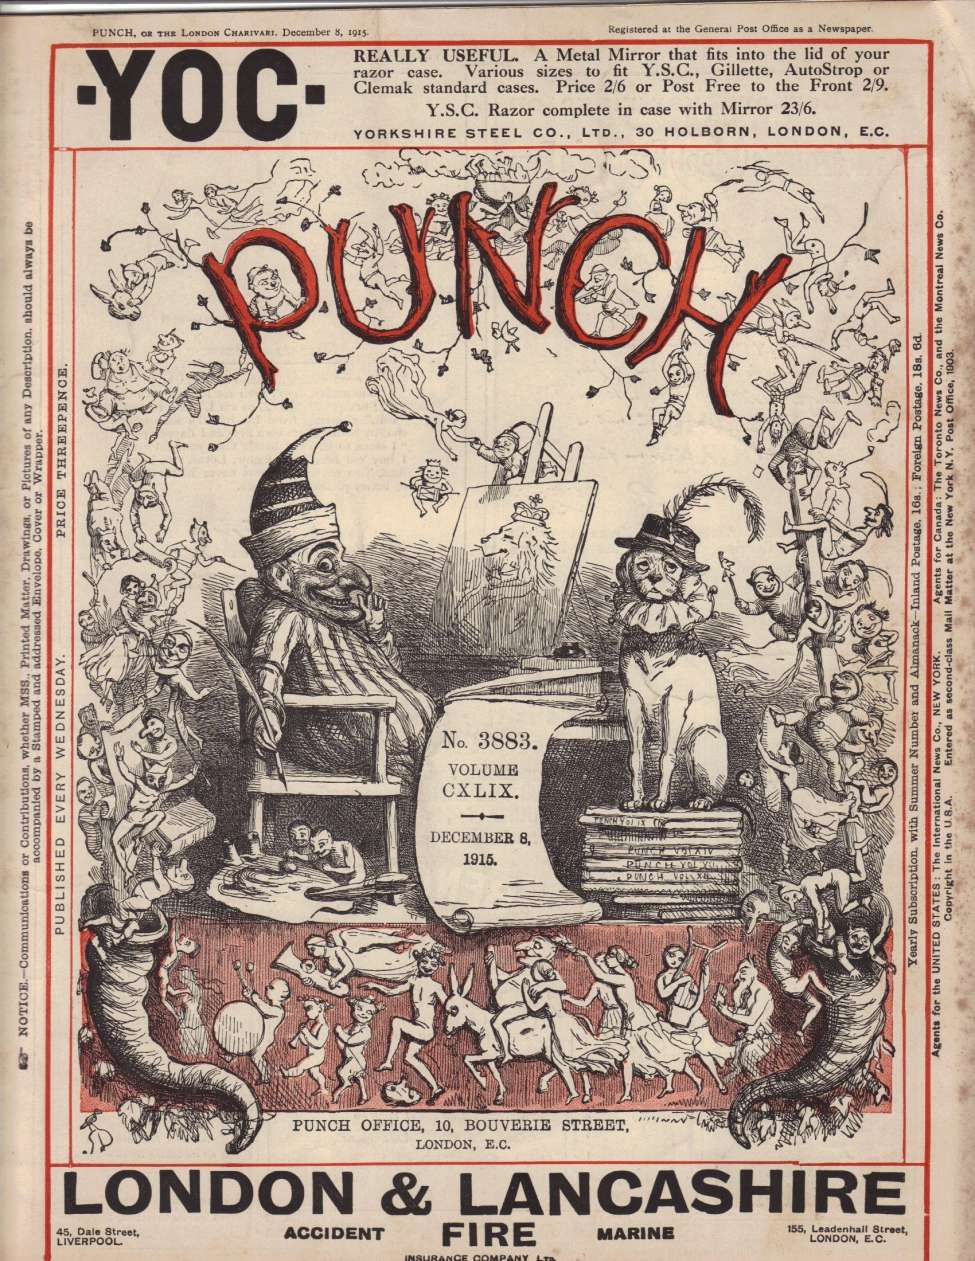 Book Cover For Punch v149 3883